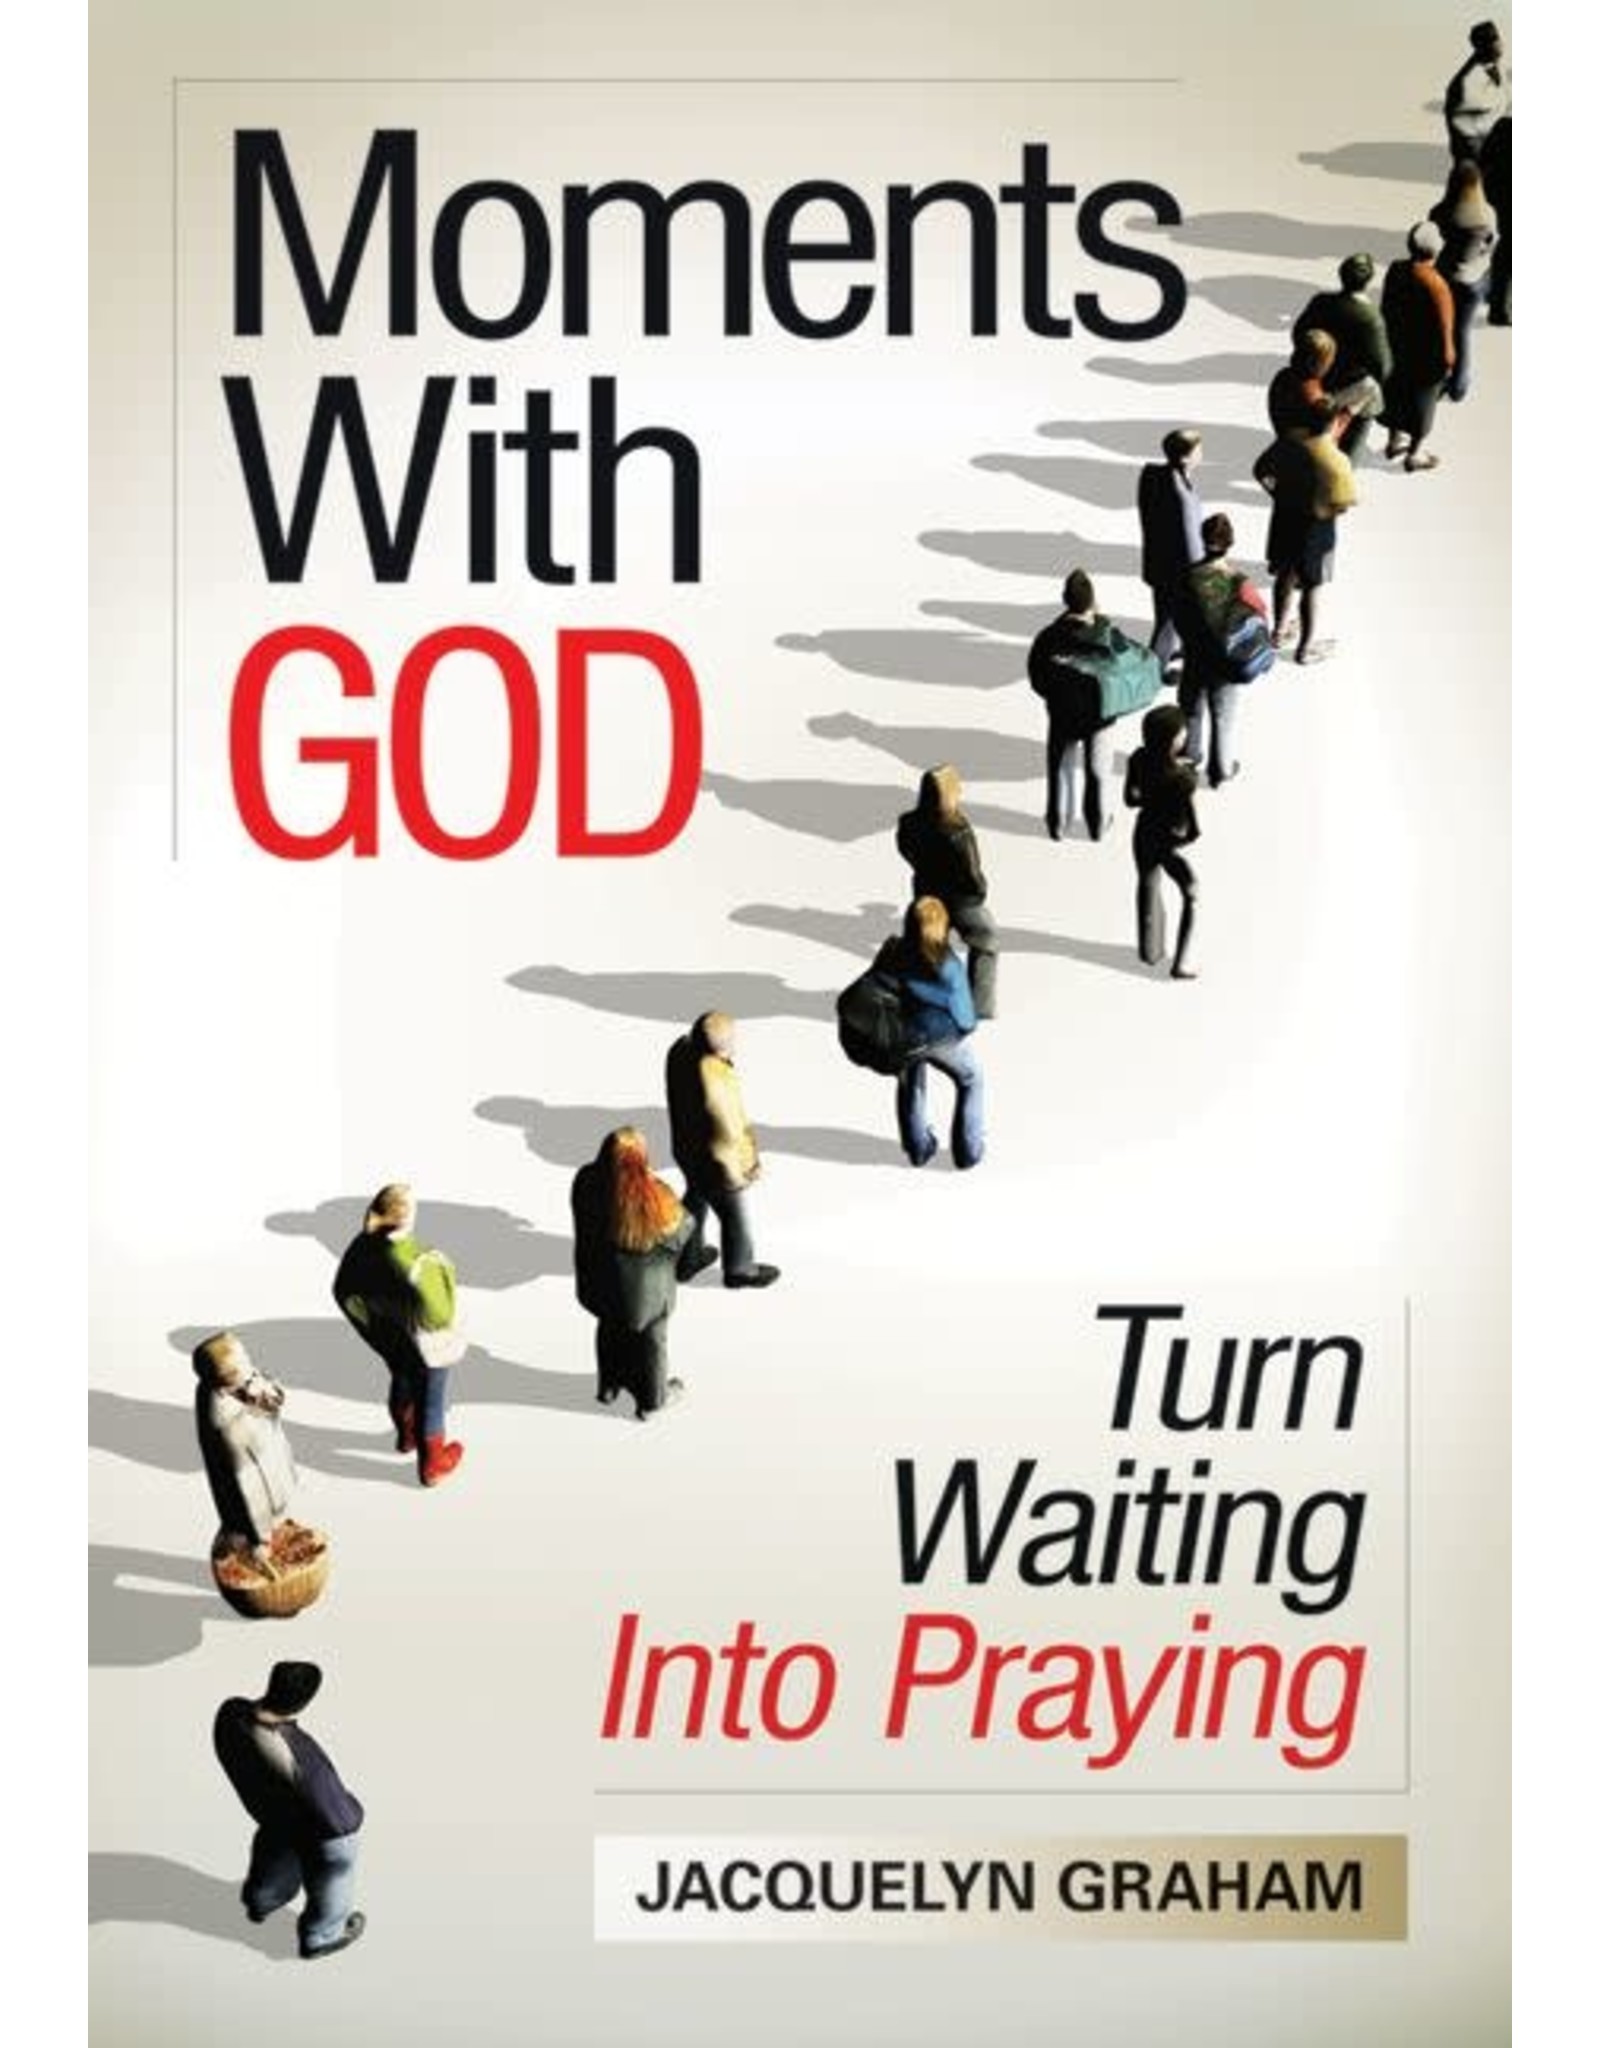 Moments With God: Turn Waiting Into Praying